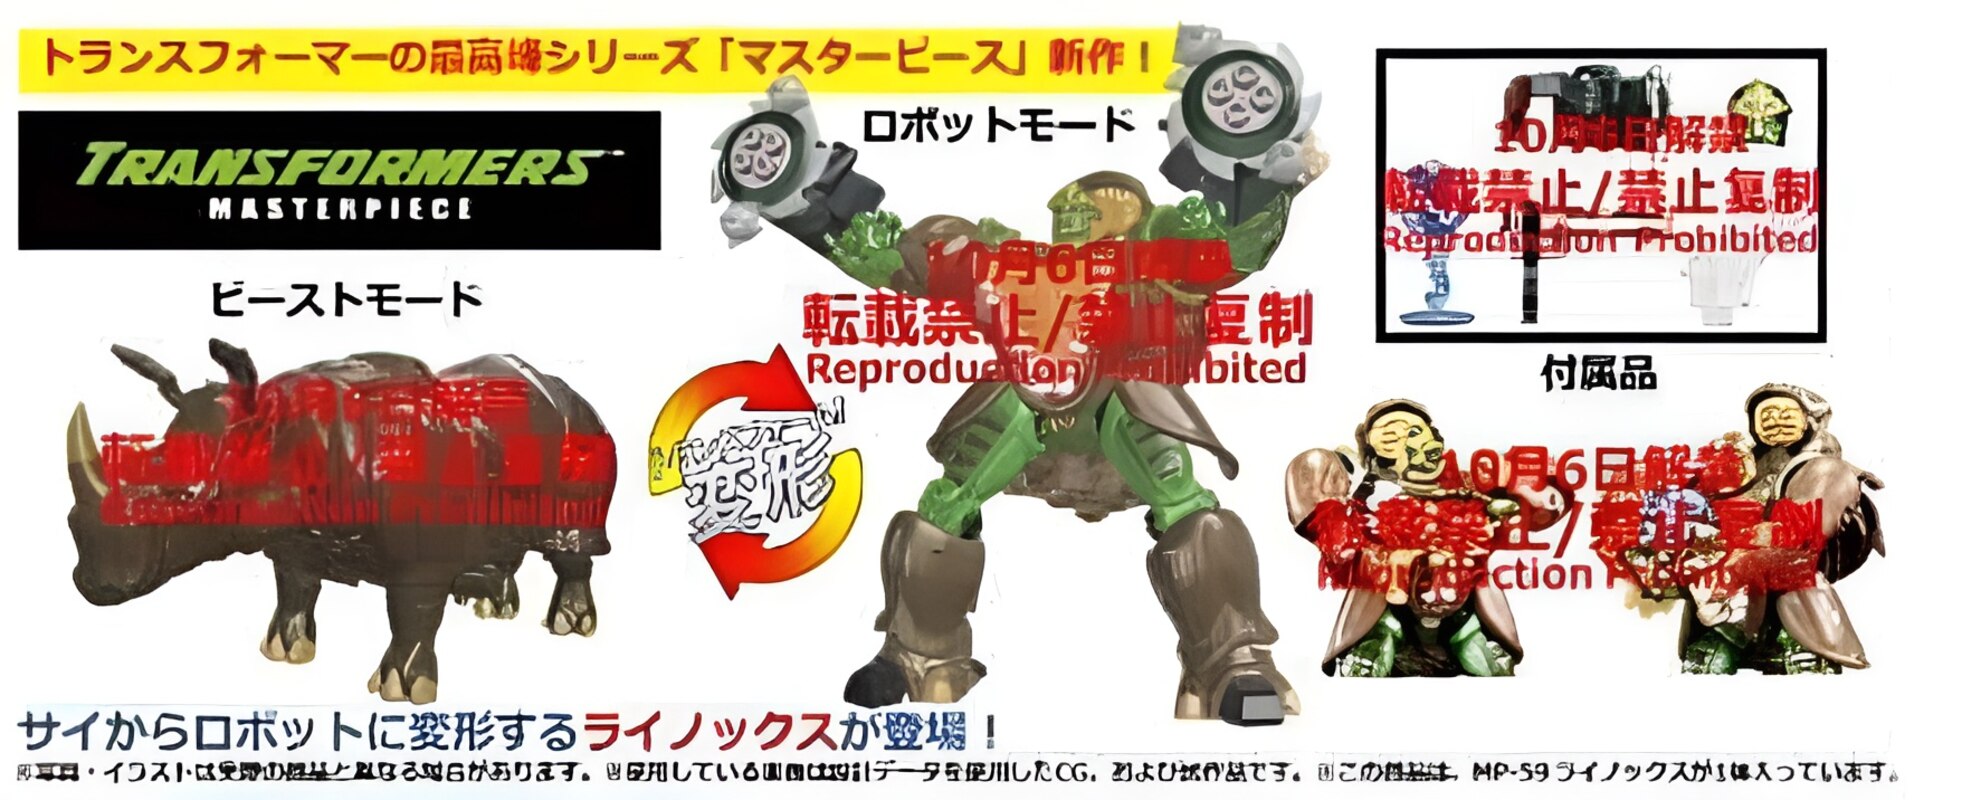 First Look at MP-59 Beast Wars Rhinox from Transformers Masterpiece?